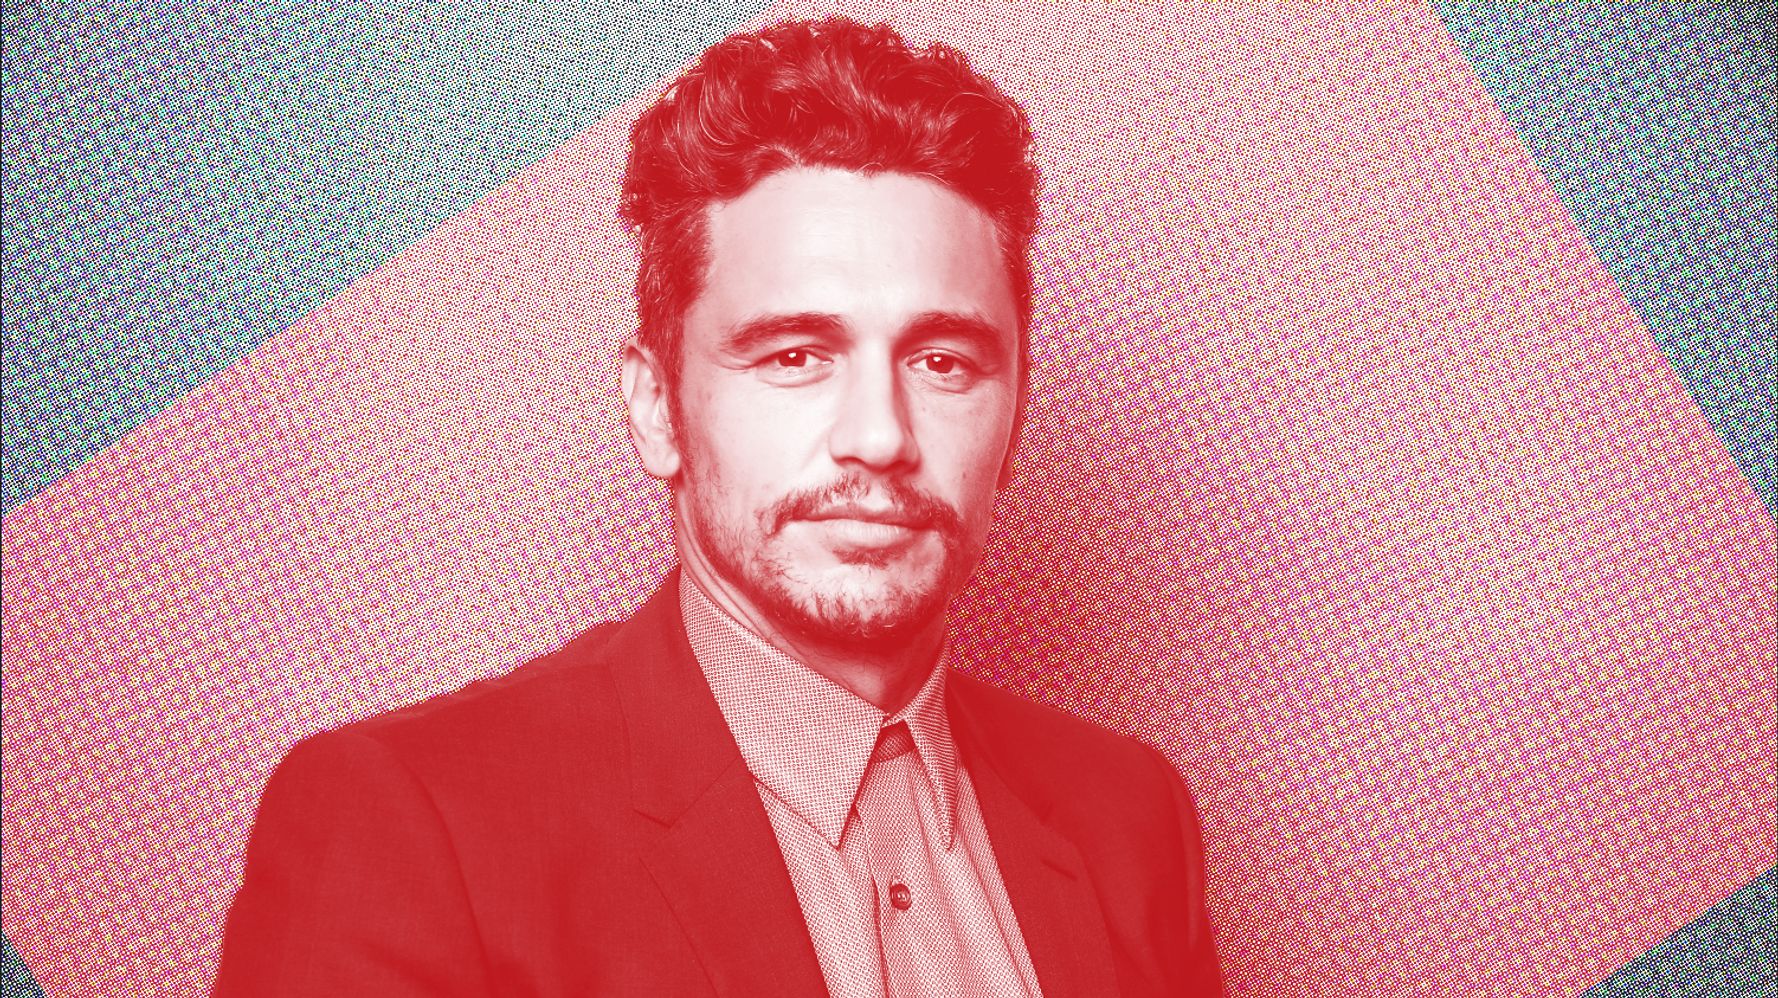 James Franco Made A Brand Out Of His Sexuality. Now He's An Alleged  Harasser Without An Oscar Nomination. | HuffPost Entertainment